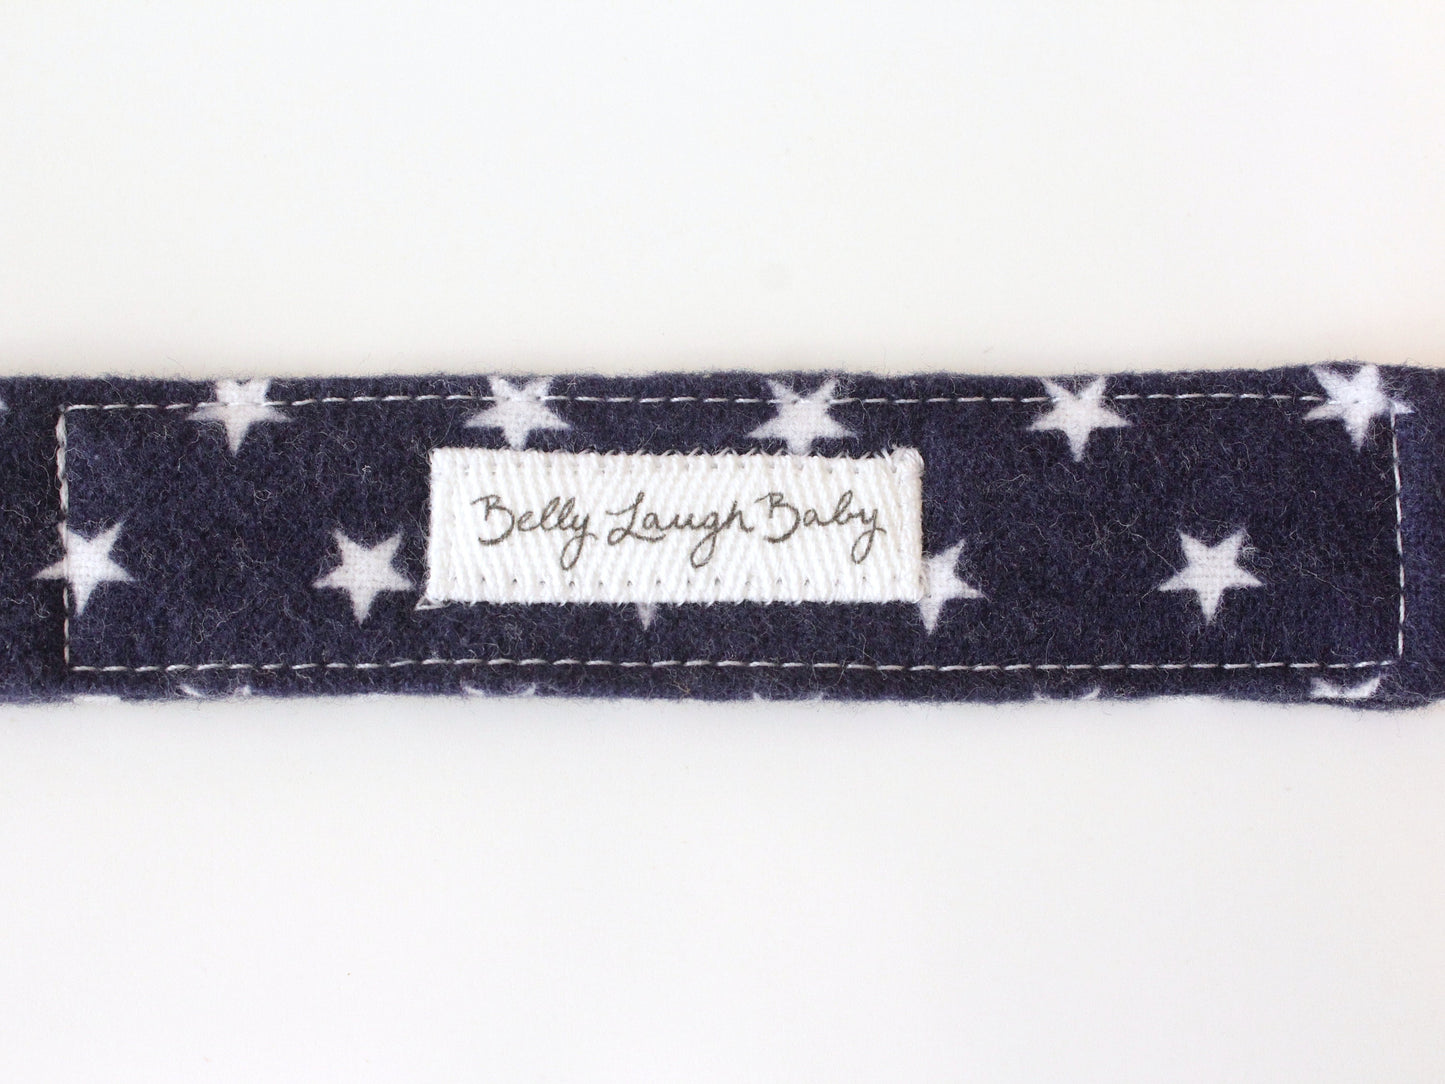 Blue Stars Flannel Pacifier Clip Gender Neutral | Baby Gift | Soother Leash Binky Holder | CPSC Compliant